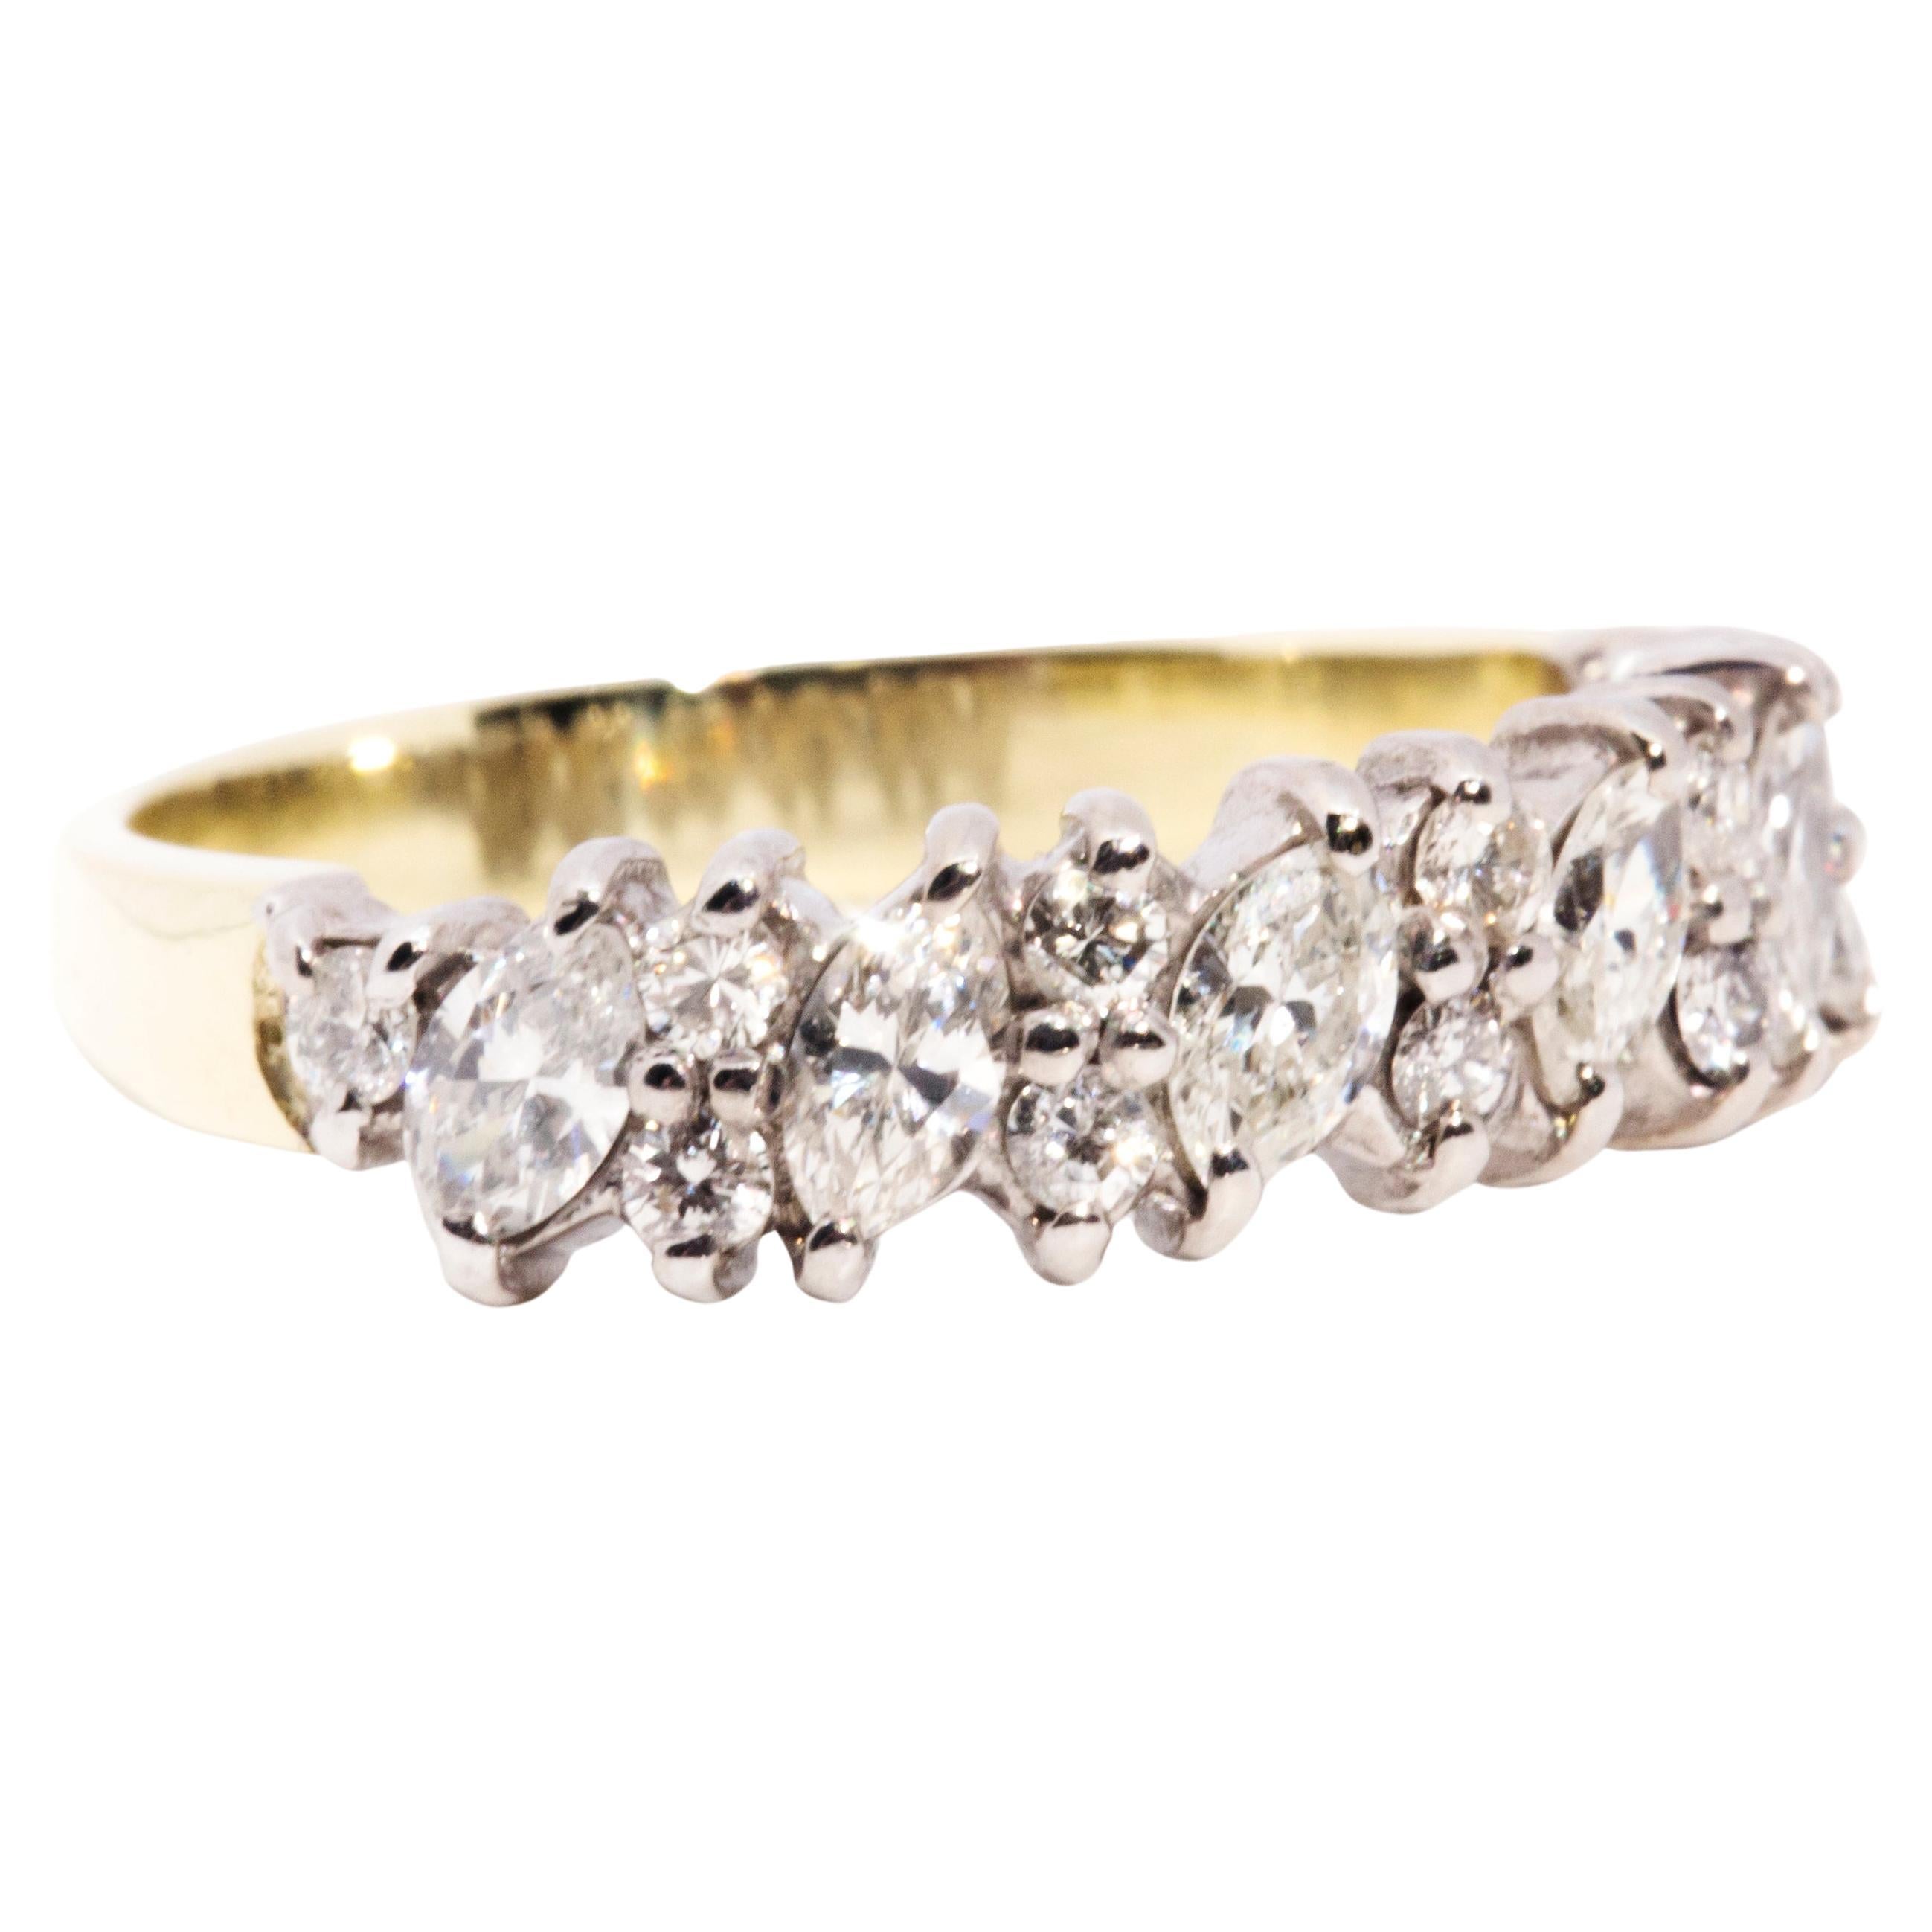 Crafted in 18 carat gold, this enchanting vintage ring is embellished with six shimmering marquise cut diamonds alternating with six pairs of sparkling round brilliant cut diamonds. This darling jewel has been named The Ezra Ring. She invokes